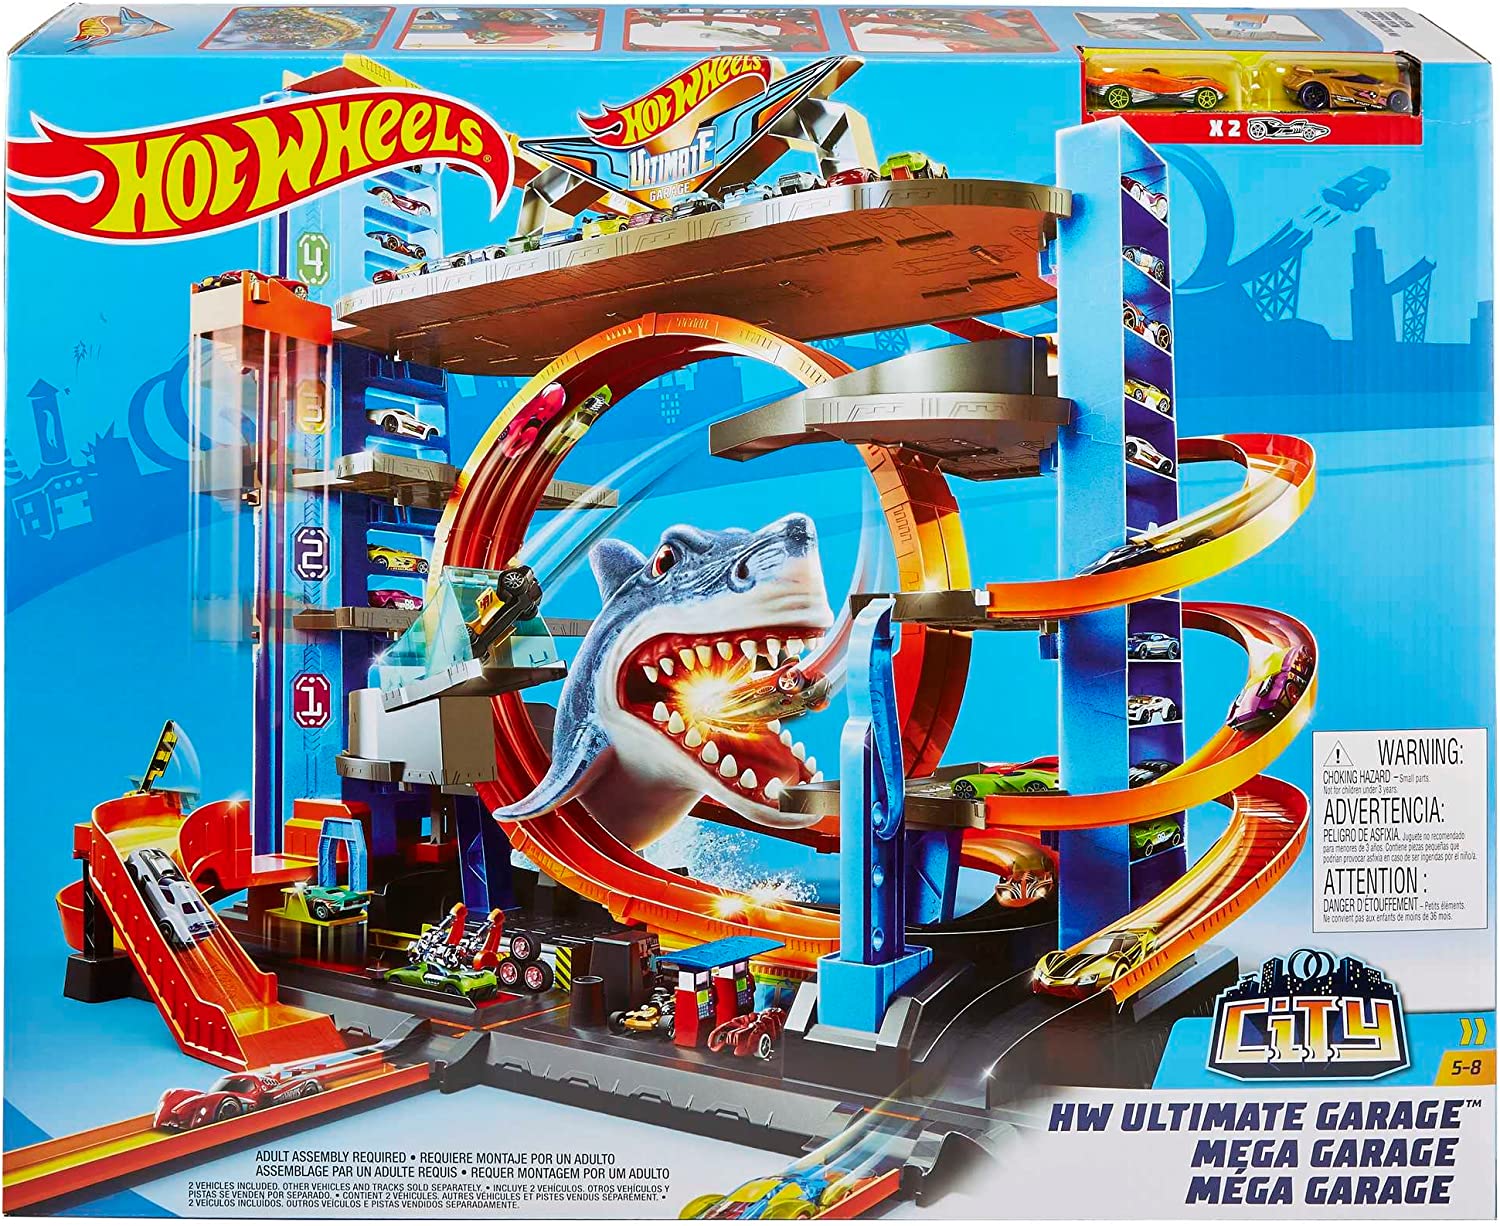 Hot Wheels FTB69 City Ultimate Car Park, Garage and Car Park with Shark for +90 Cars with Looping Tracks, Includes 2 x Toy Cars Approx. 63 cm High, For Ages 5+